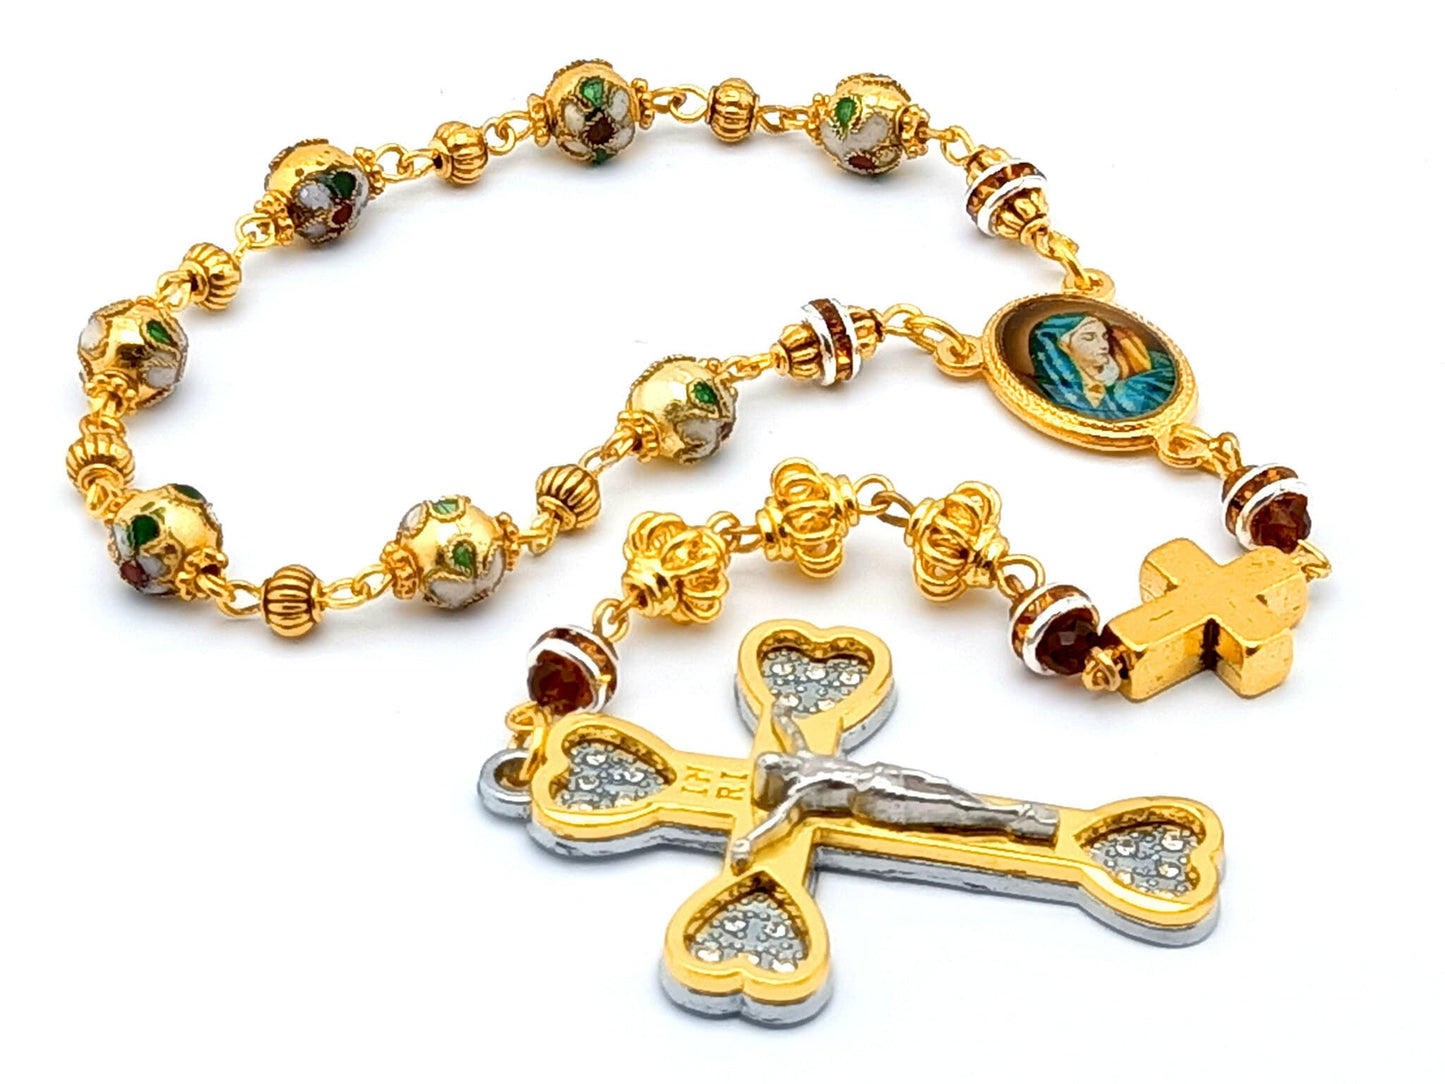 Our Lady of Sorrows unique rosary beads dolor rosary prayer chaplet with gold floral cloisonne beads, golden diamonte crucifix and picture centre medal.